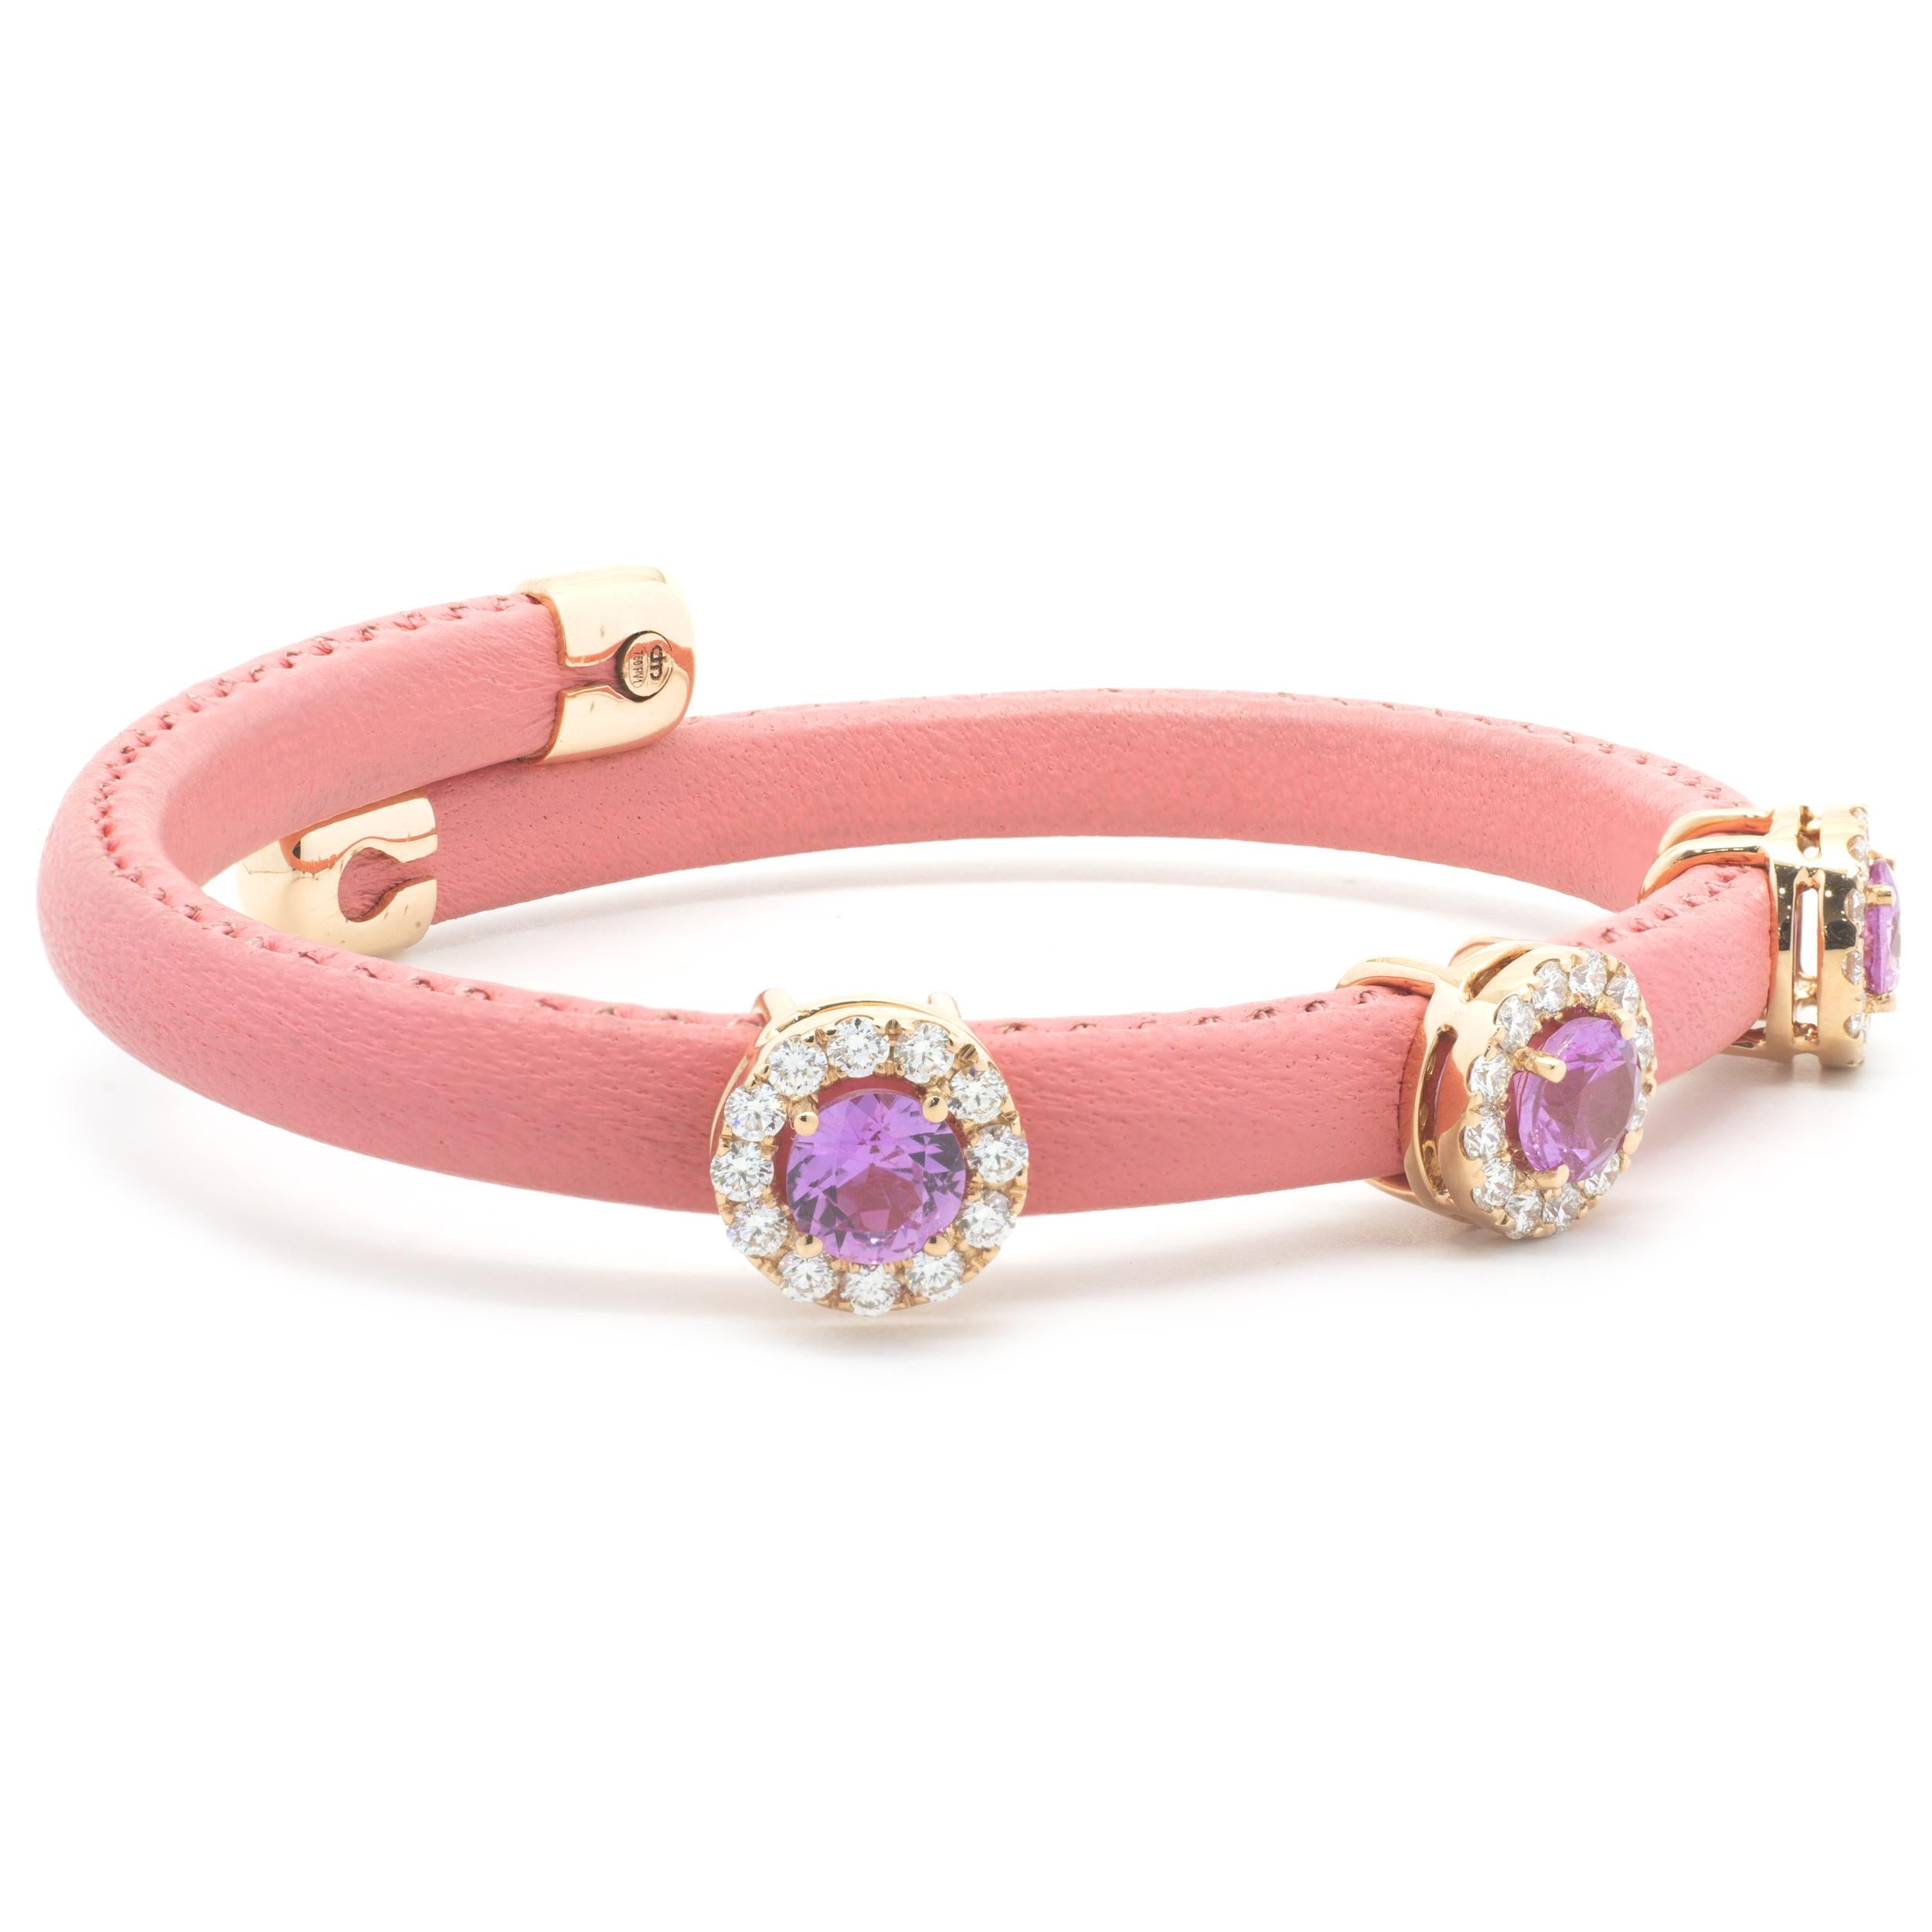 Designer: custom
Material: 18K white gold
Diamond: 36 round cut = .81cttw
Color: G/H
Clarity: VS
Pink Sapphire: 3 round cut = 1.93cttw
Dimensions: bracelet will fit up to a 7-inch wrist
Weight: 11.41 grams
